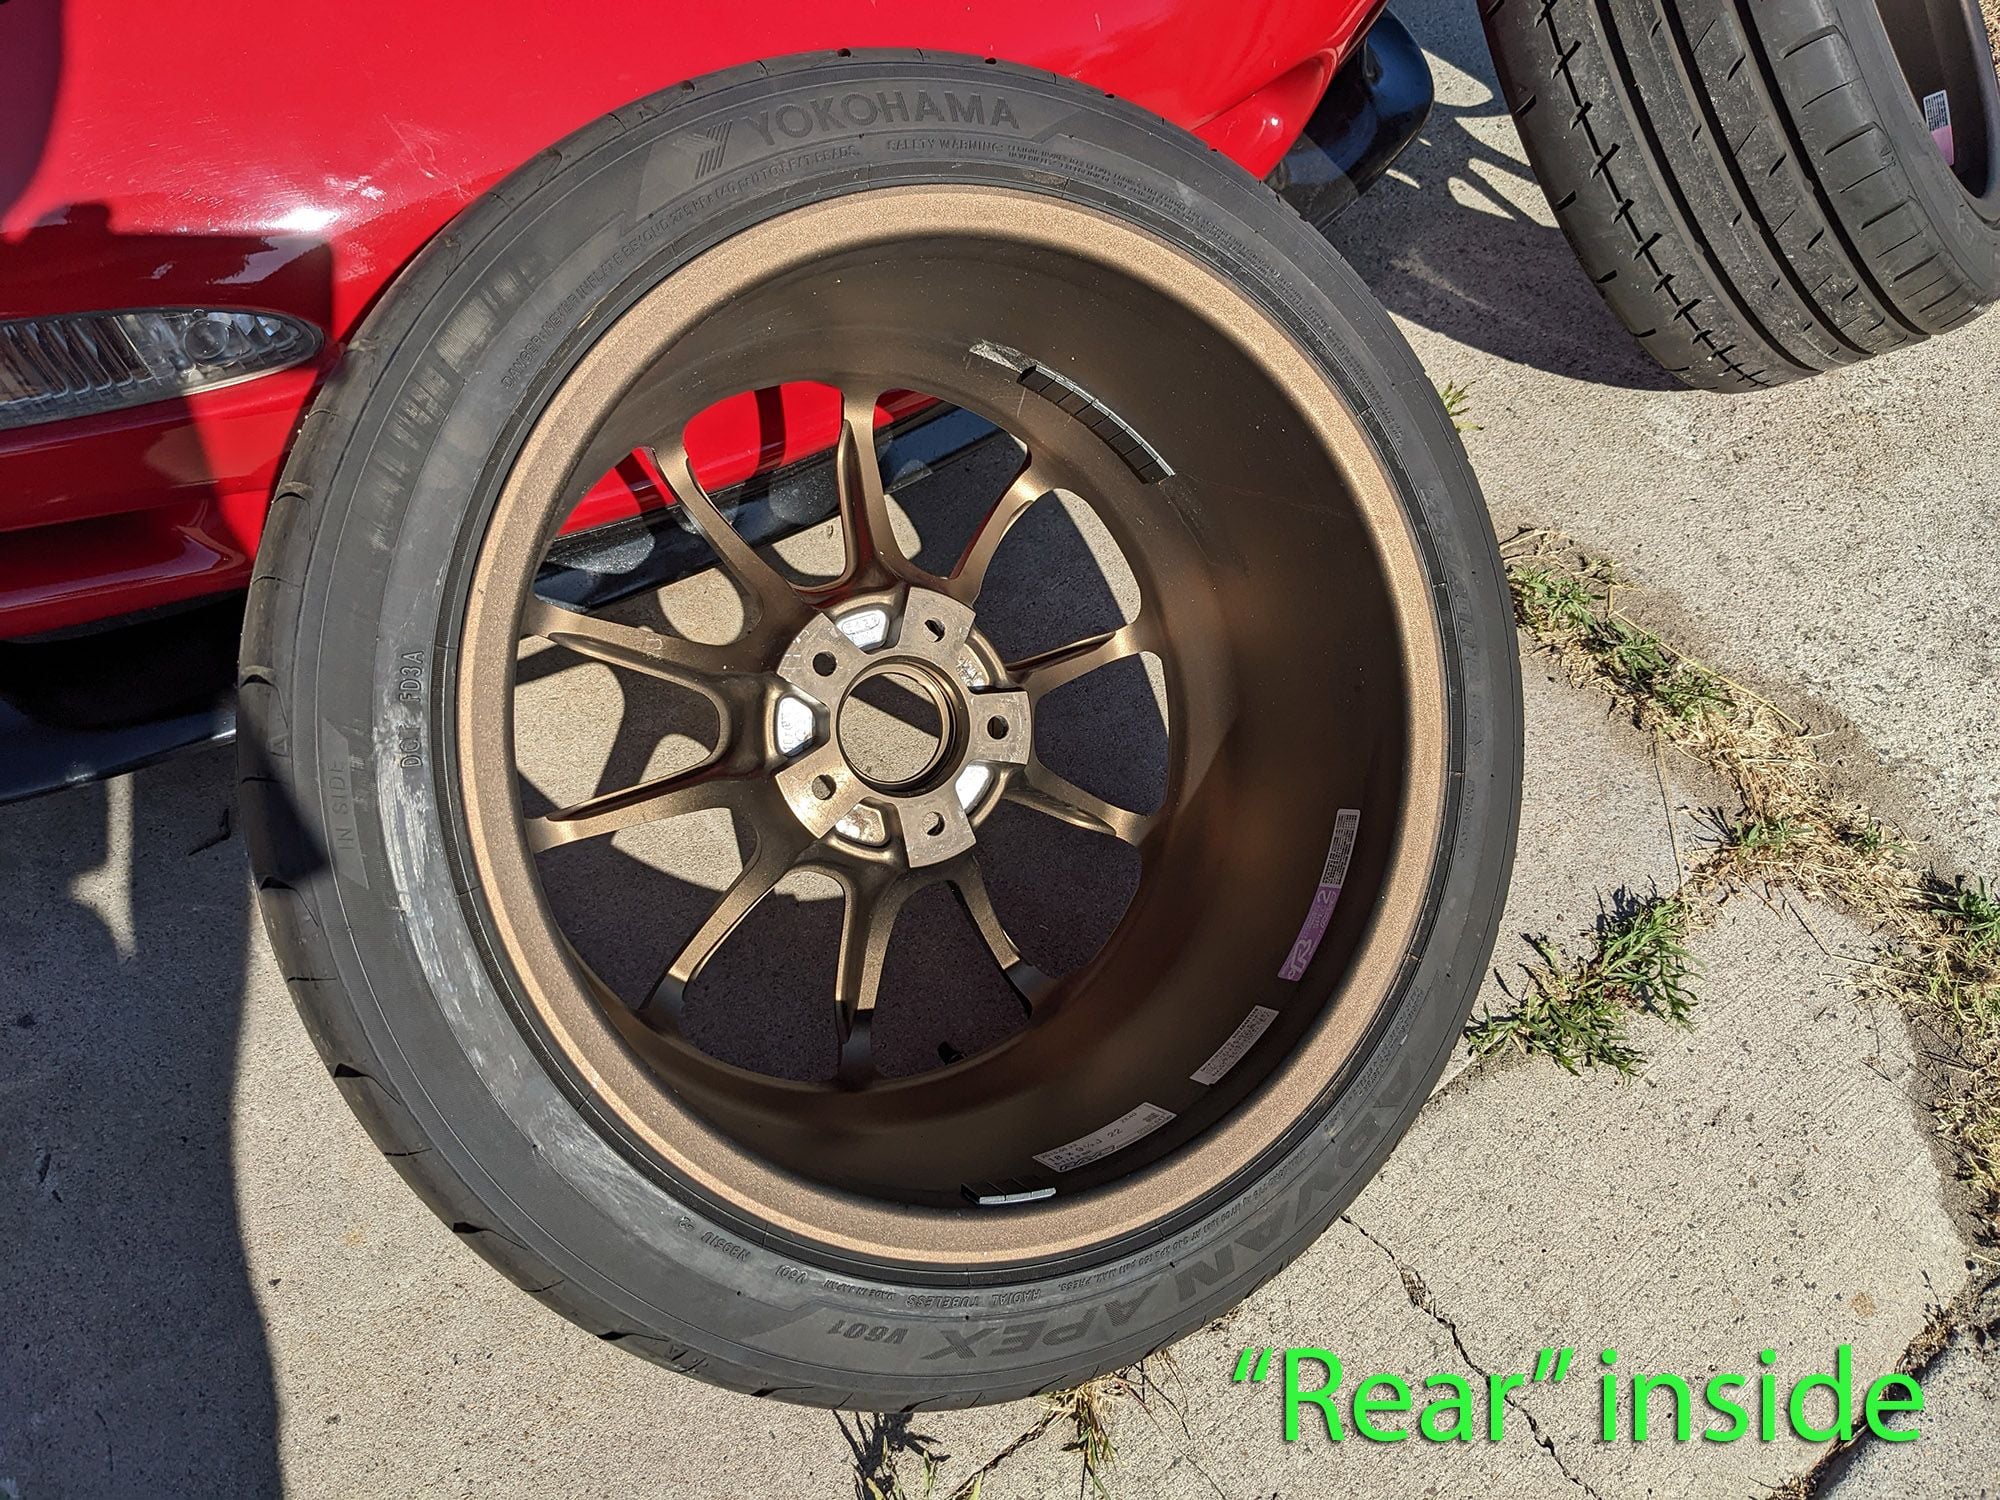 Wheels and Tires/Axles - Volk ZE40 18x9.5 +22 5x114.3 Bronze Rims and Tires - Used - All Years Any Make All Models - San Diego, CA 92111, United States